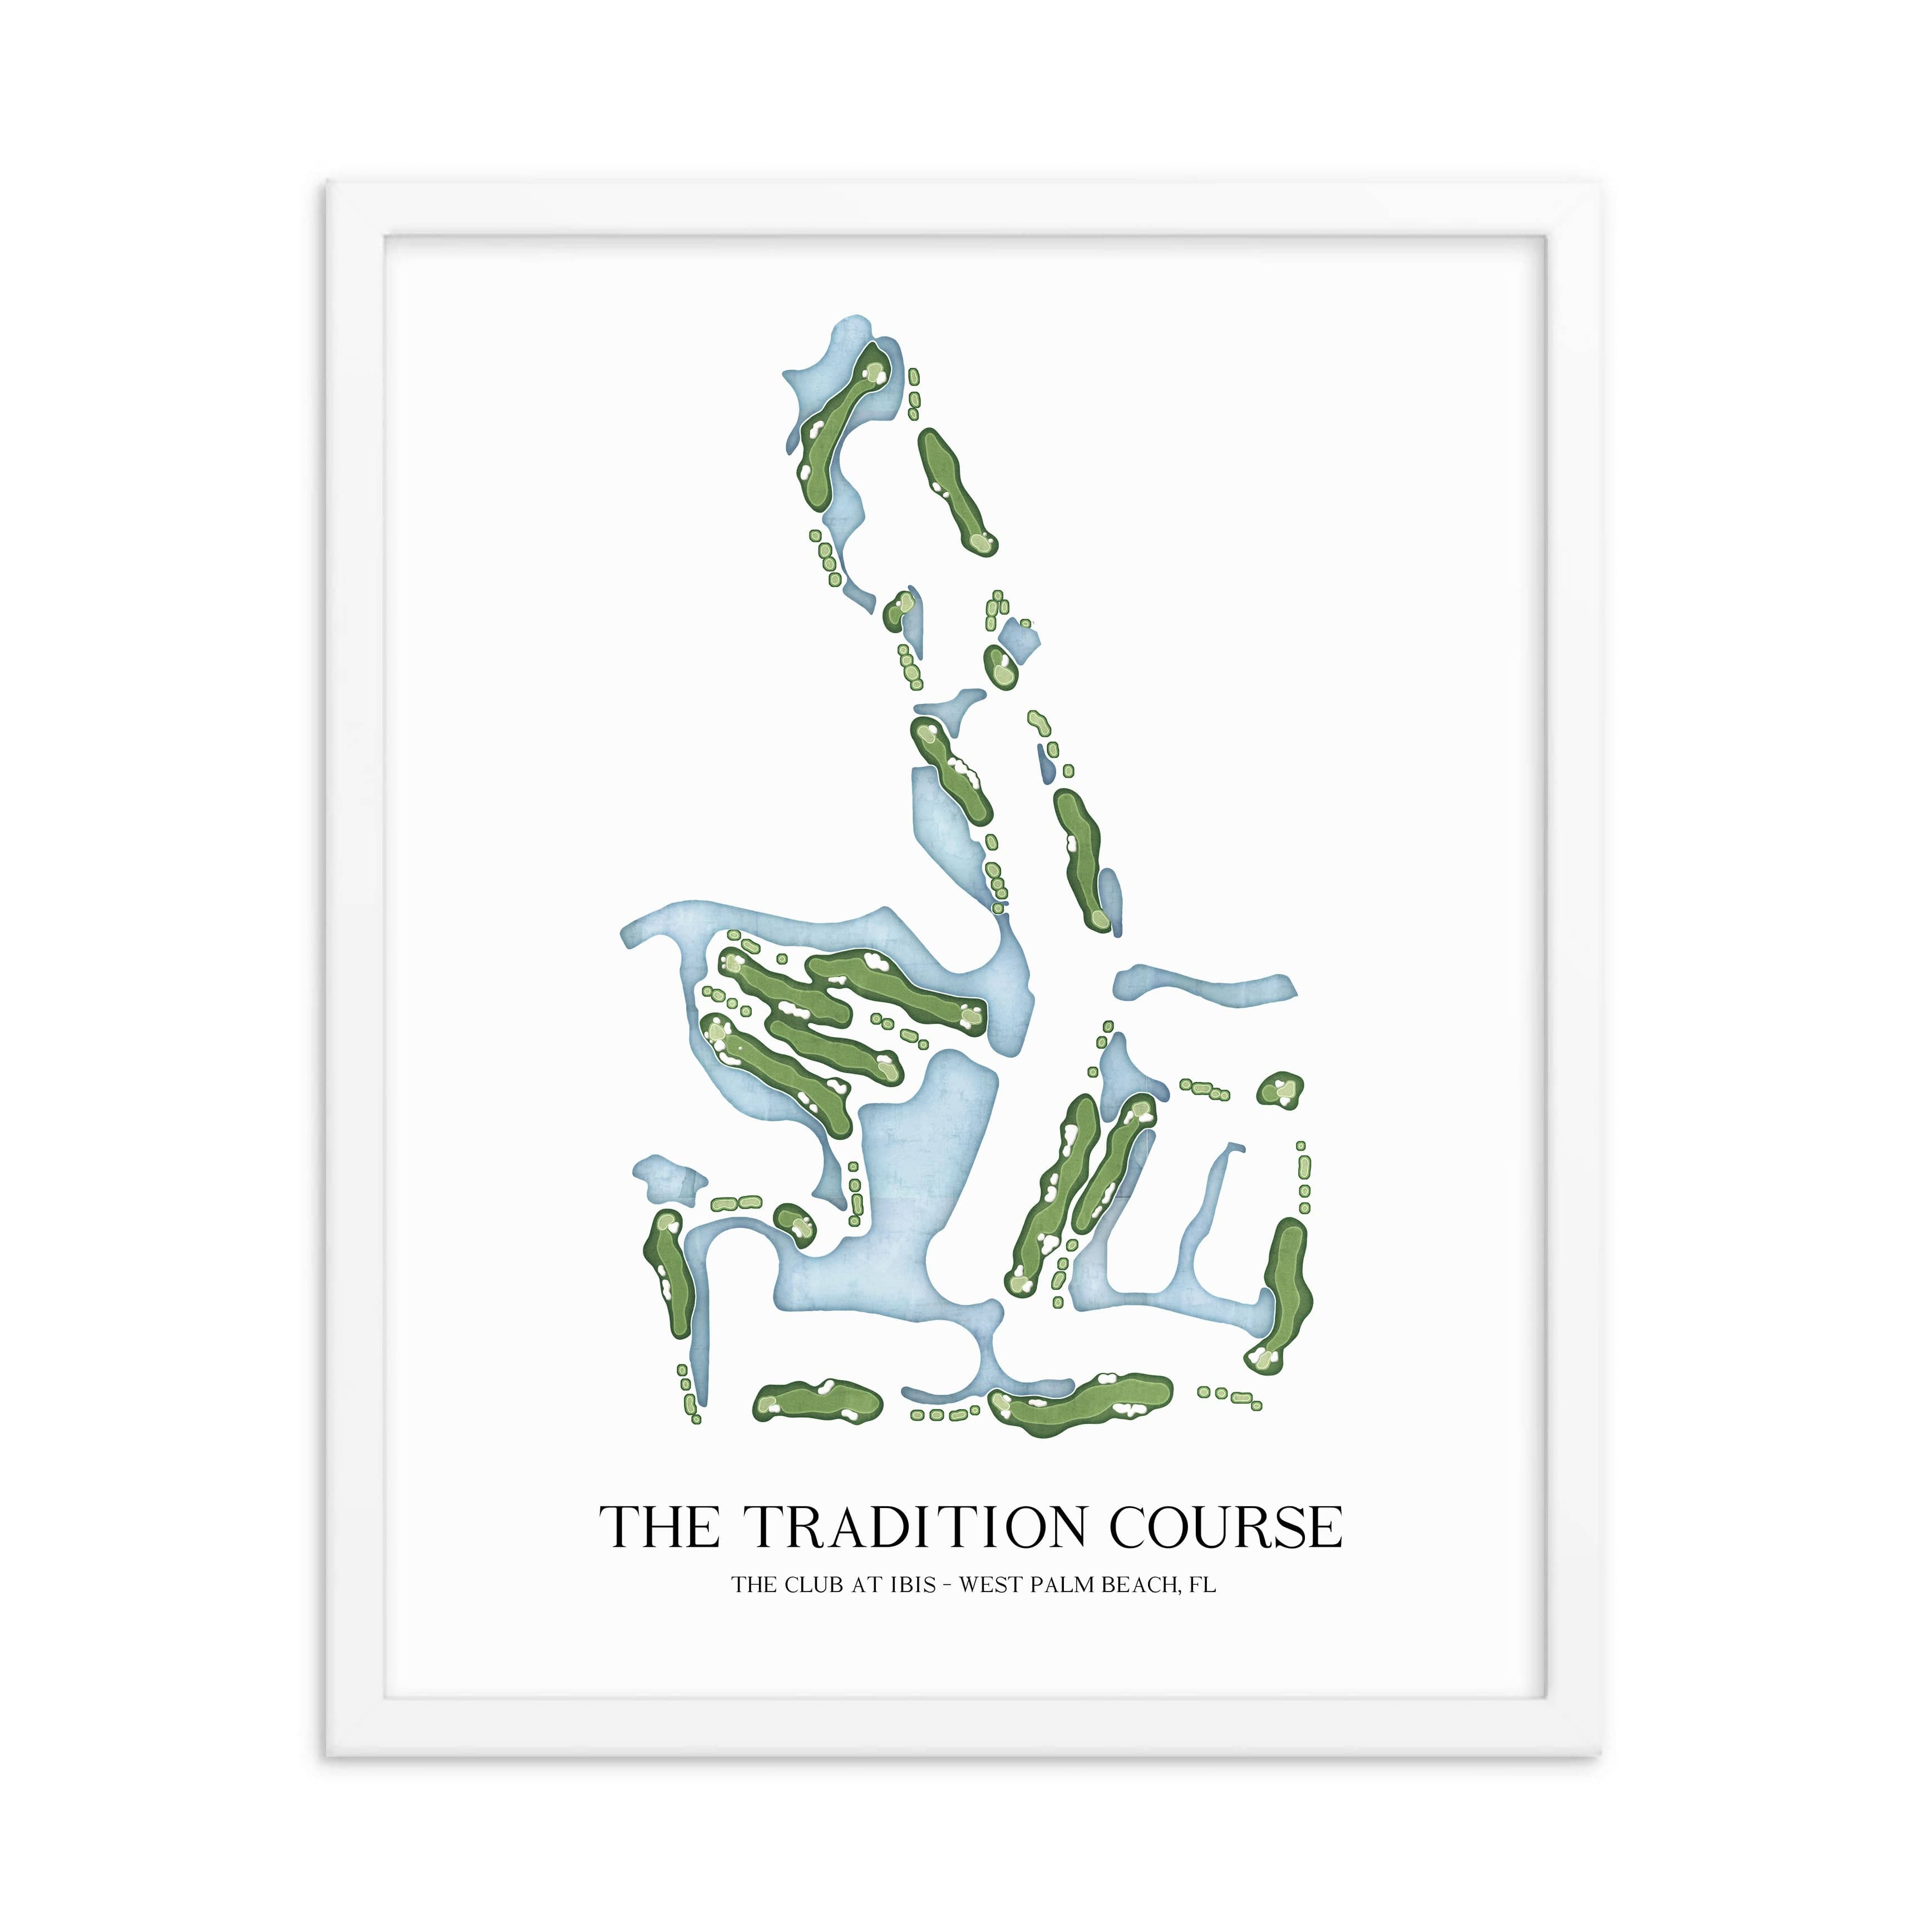 The 19th Hole Golf Shop - Golf Course Prints -  The Club at Ibis - Tradition Golf Course Map